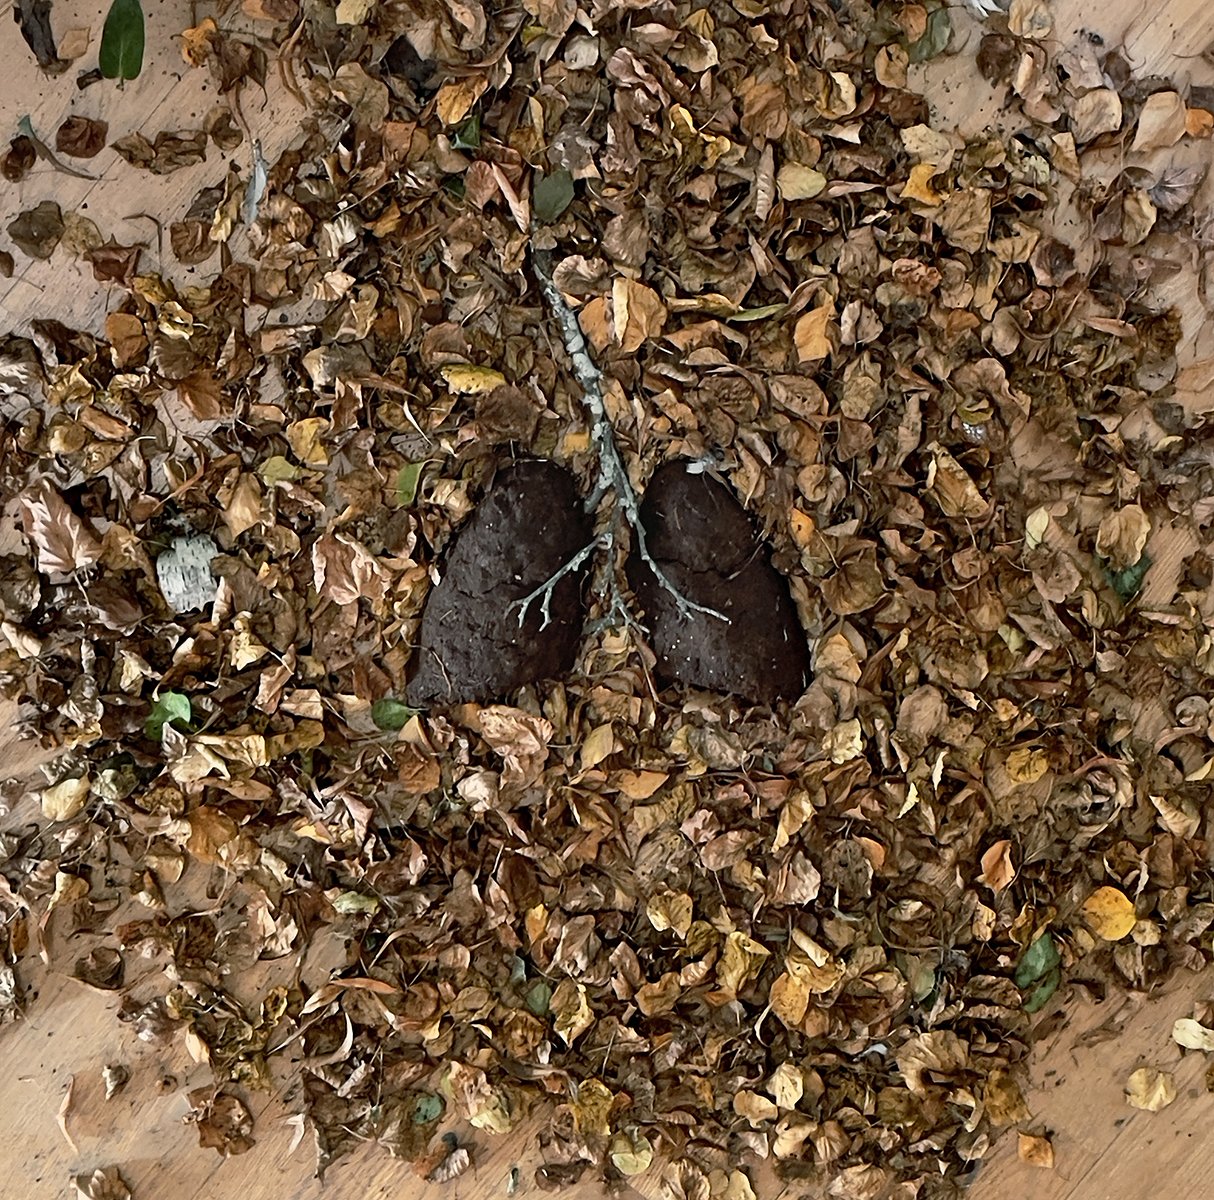 'Lungs of the Earth', partially decomposed peat moss, leaves and branches